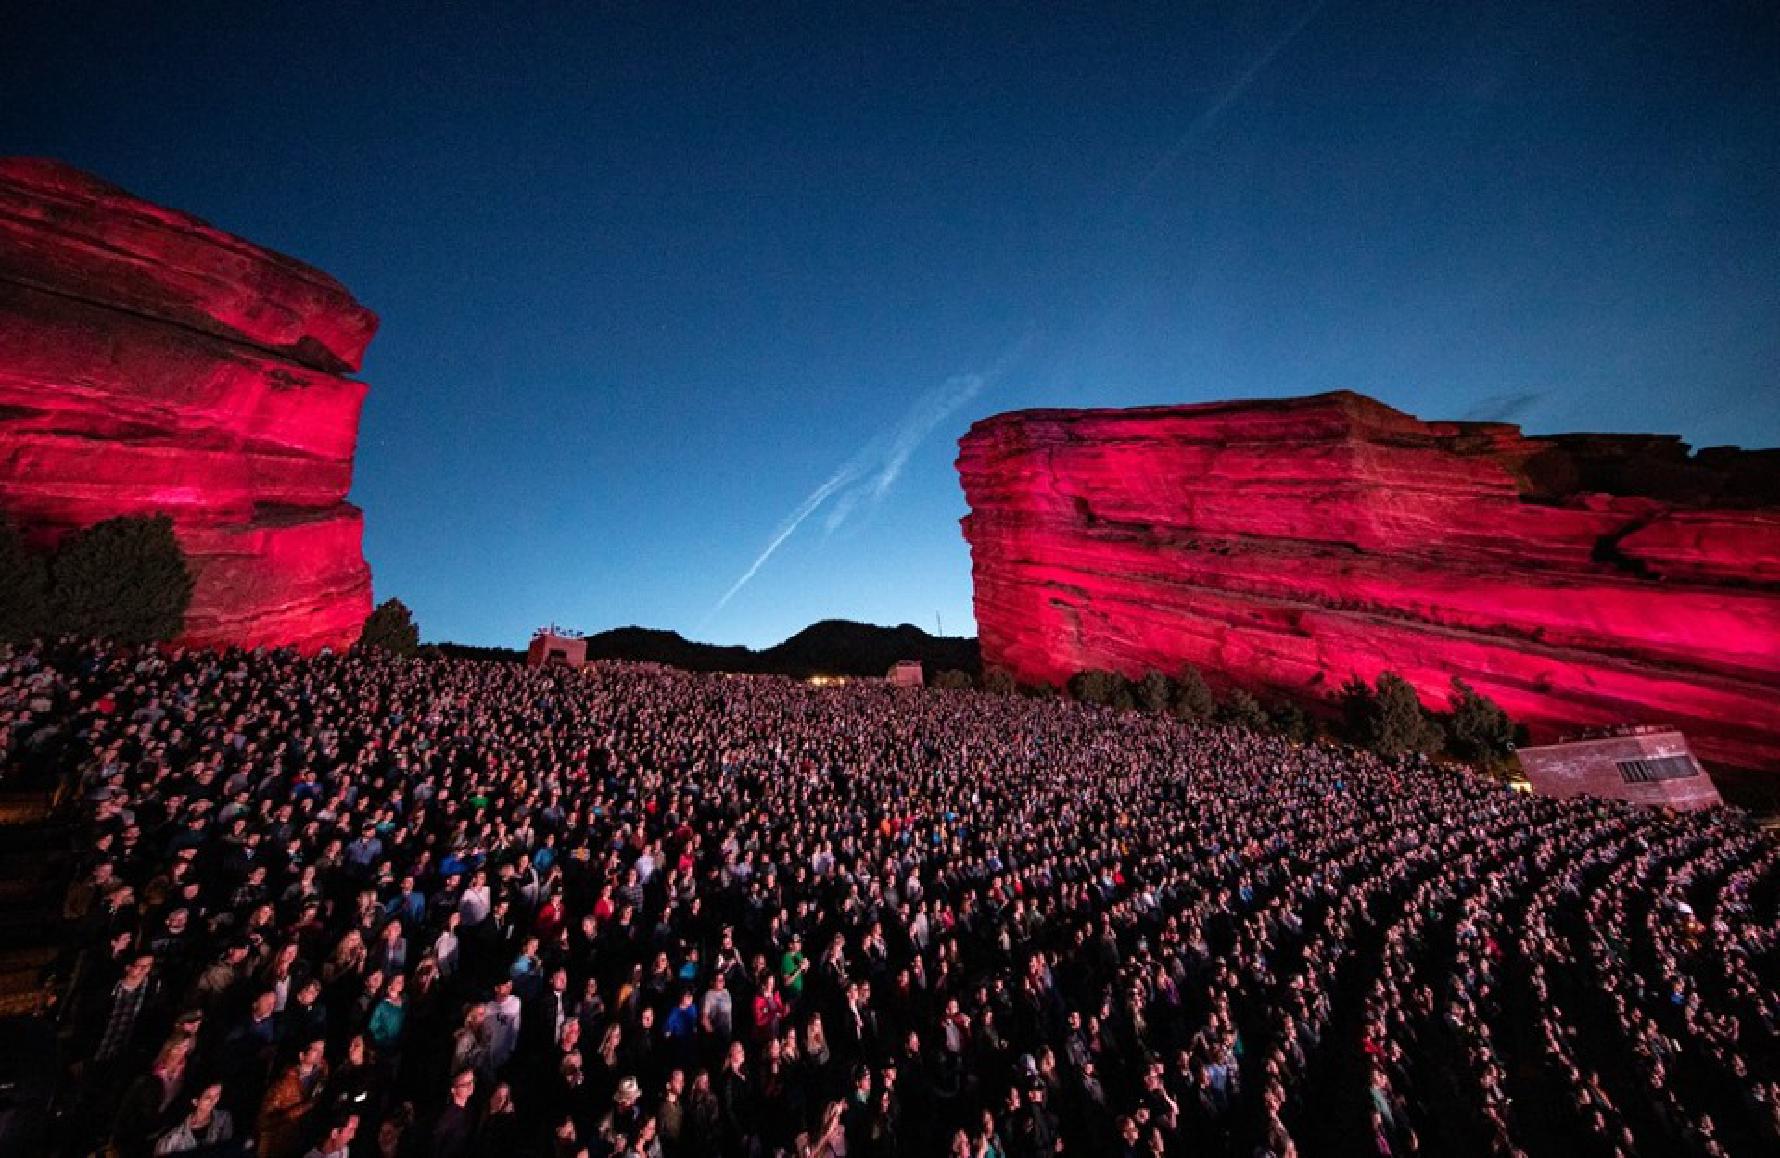 Good news from the Red Rocks Amphitheatre - Revolution 93.5 FM